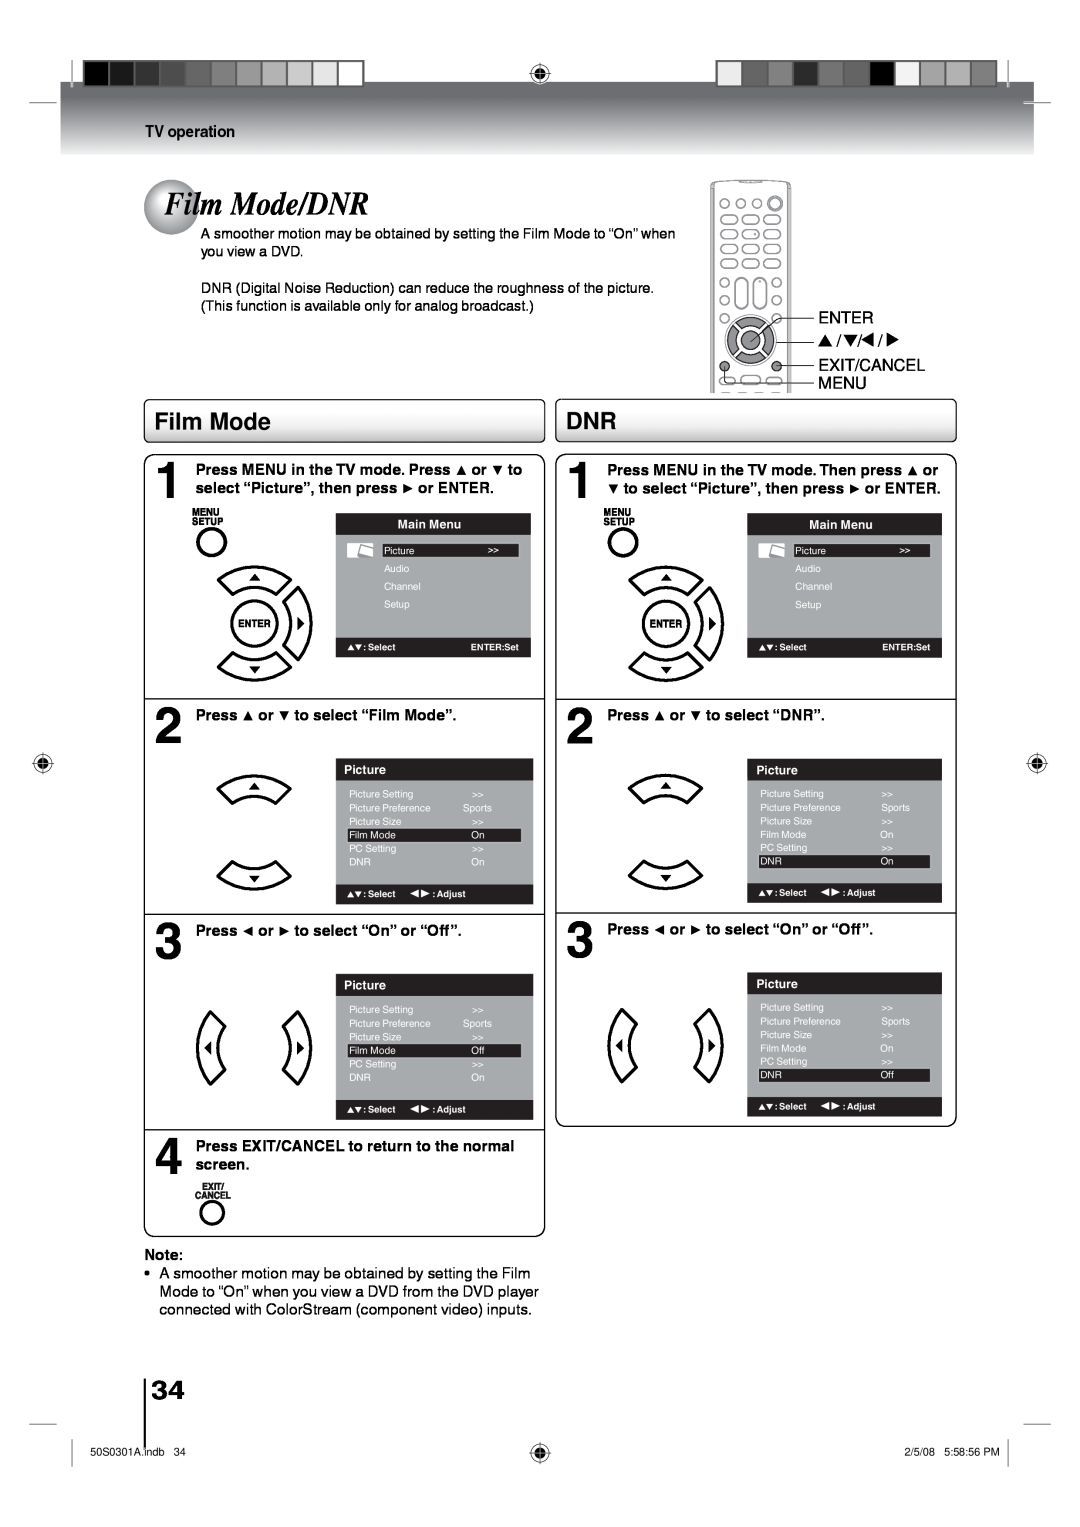 Toshiba 22LV505C Film Mode/DNR, TV operation, select “Picture”, then press or ENTER, Press or to select “Film Mode” 